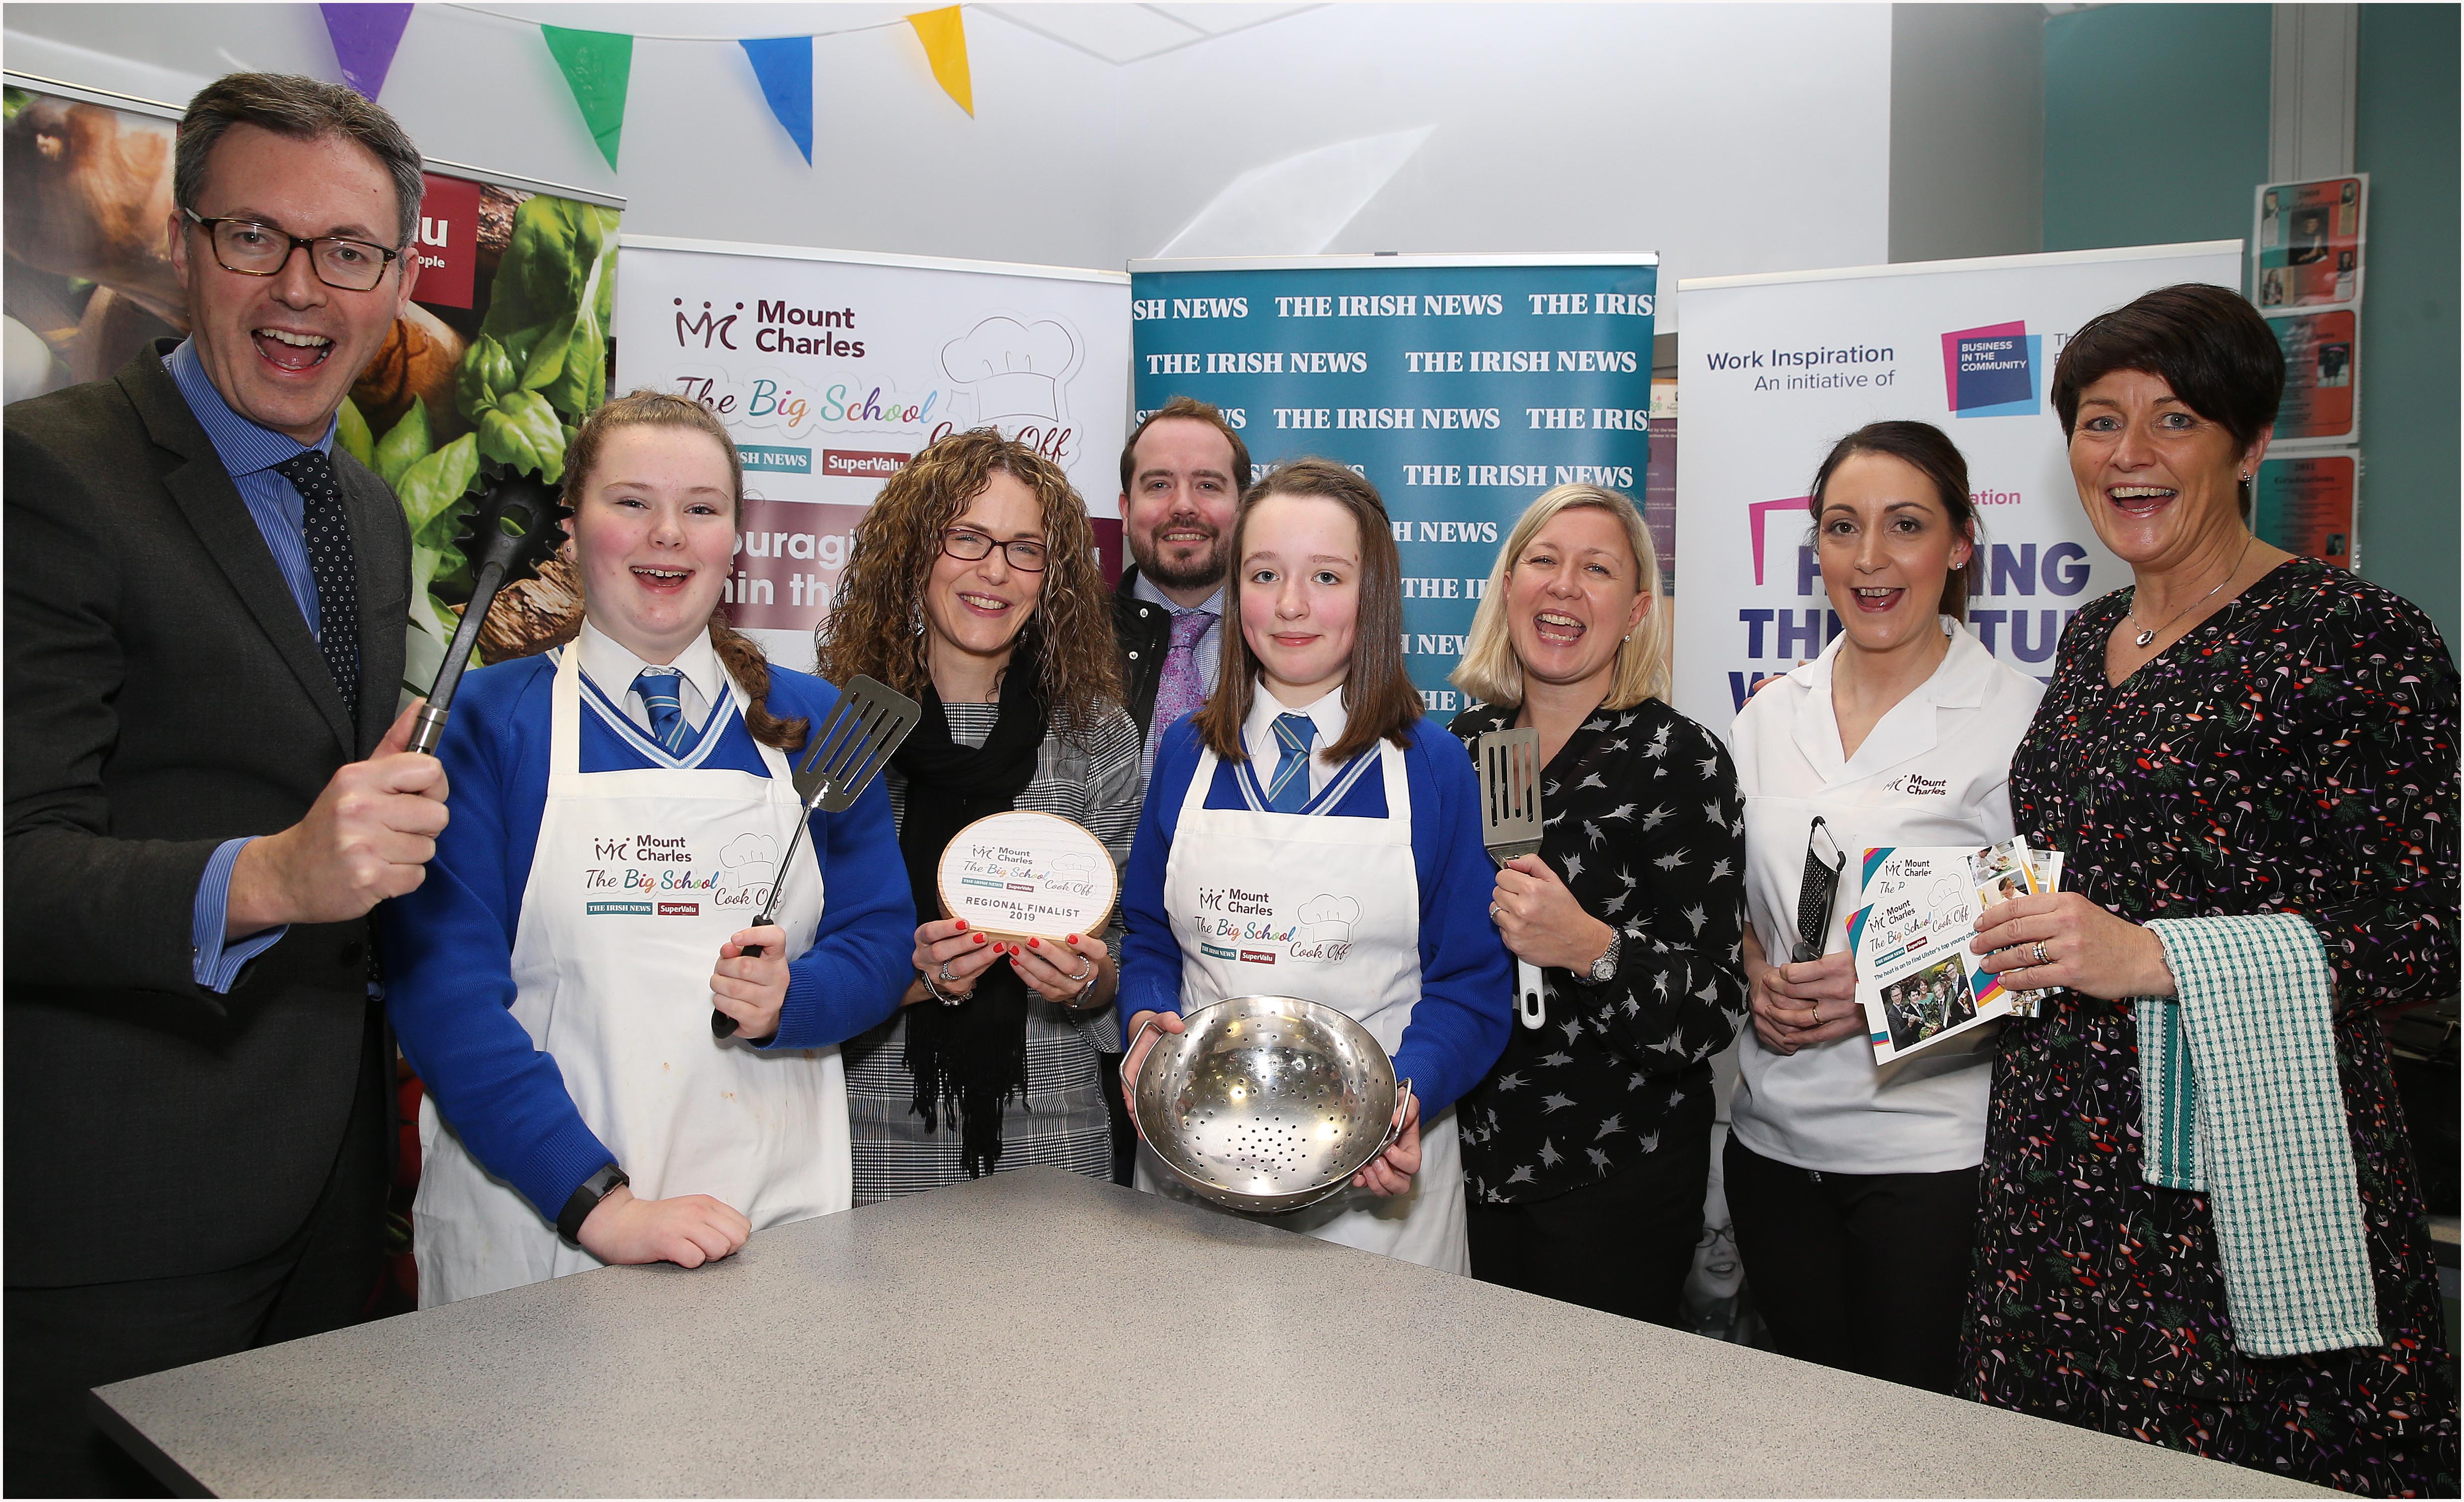 Revealed: the schools in the Mount Charles Big School Cook Off final!